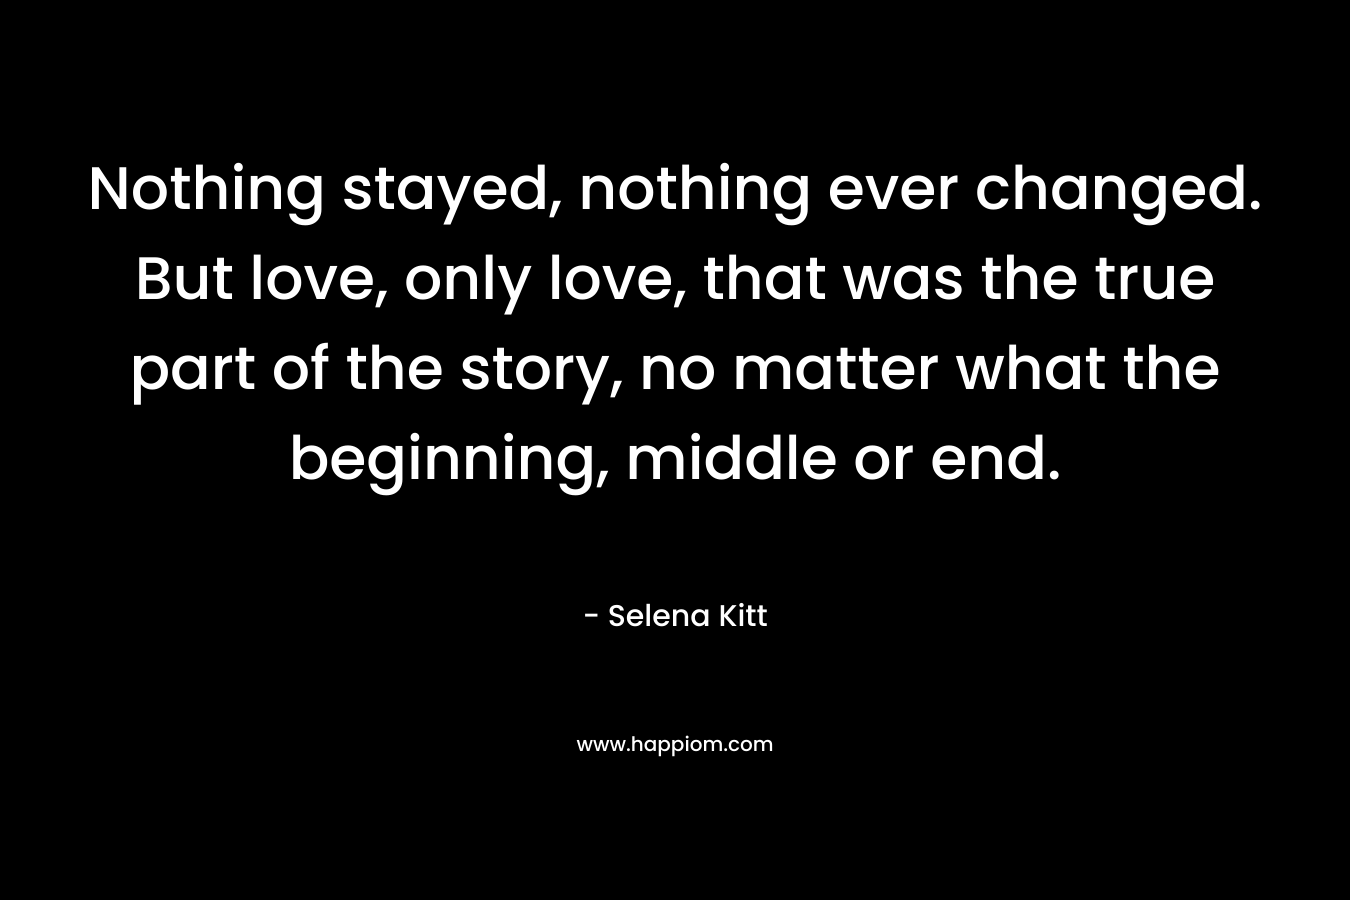 Nothing stayed, nothing ever changed. But love, only love, that was the true part of the story, no matter what the beginning, middle or end. – Selena Kitt